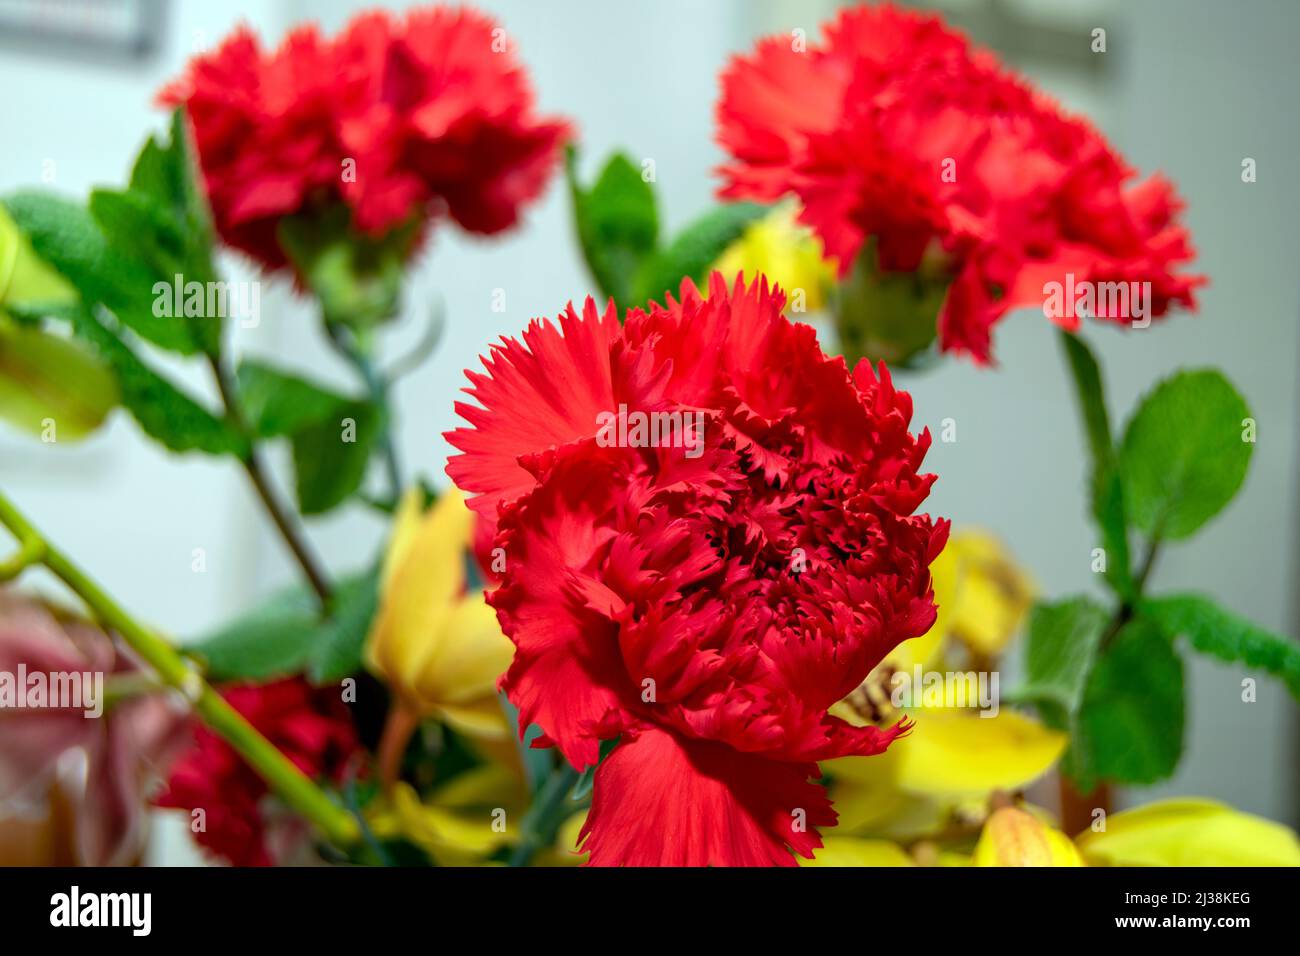 Dianthus Flowers, Carnation flower, The red carnation is related to feelings like esteem, affection, admiration and love. National Flower of Spain. Stock Photo